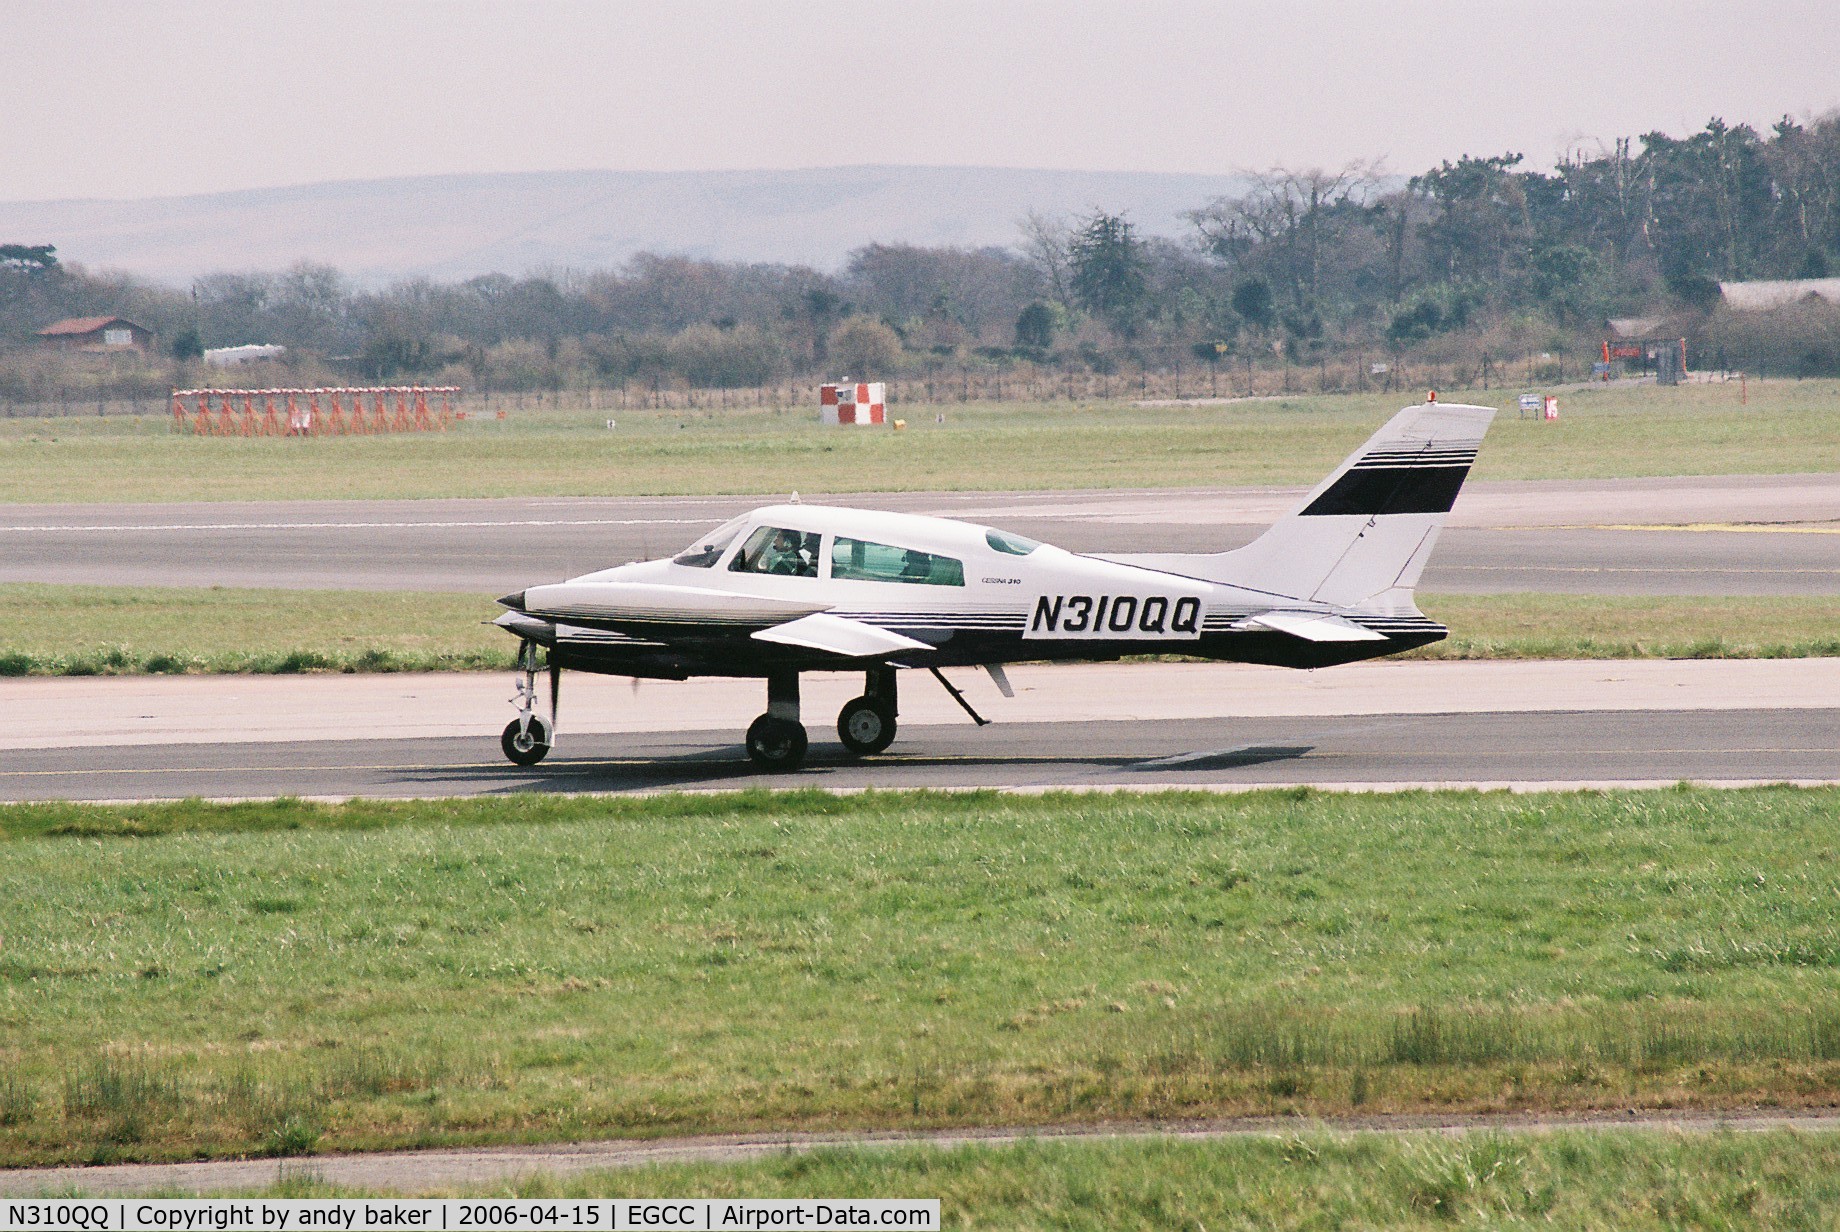 N310QQ, 1973 Cessna 310Q C/N 310Q0695, taxing in from landing on runway [24R] going onto the [NEA] ramp.